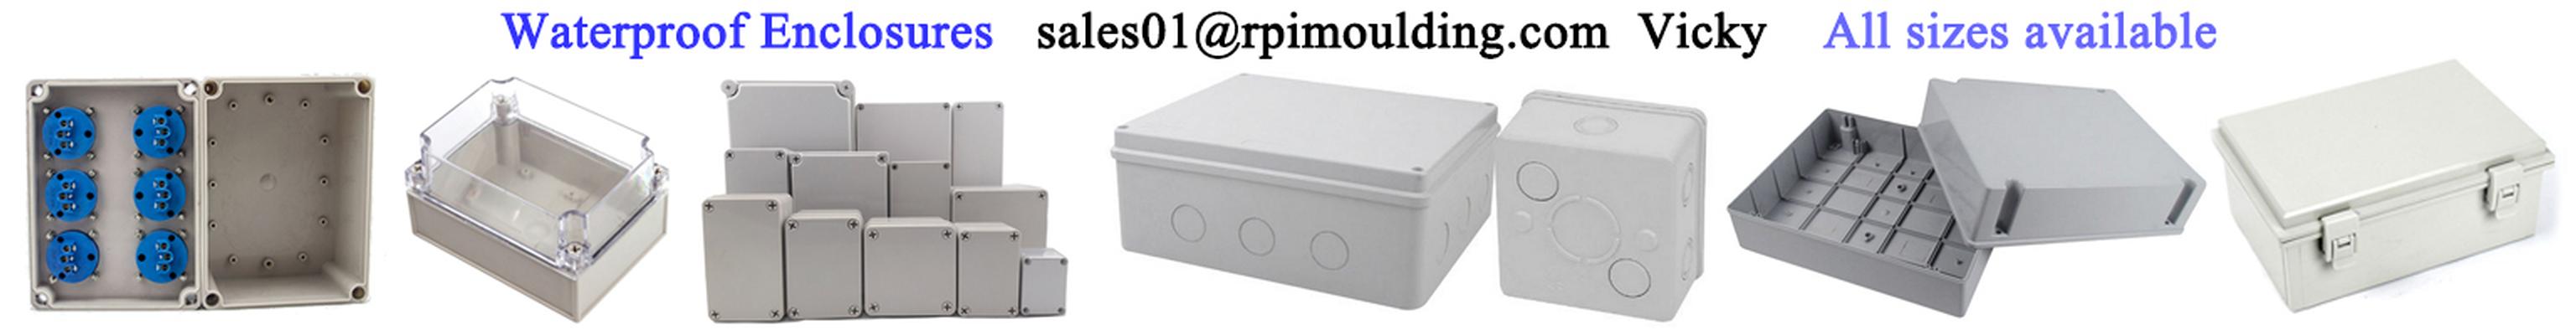 Sealed CE Rohs approved outdoor use dust splash proof plastic IP66 rated waterproof enclosures from China manufacturer sales01@rpimoulding.com